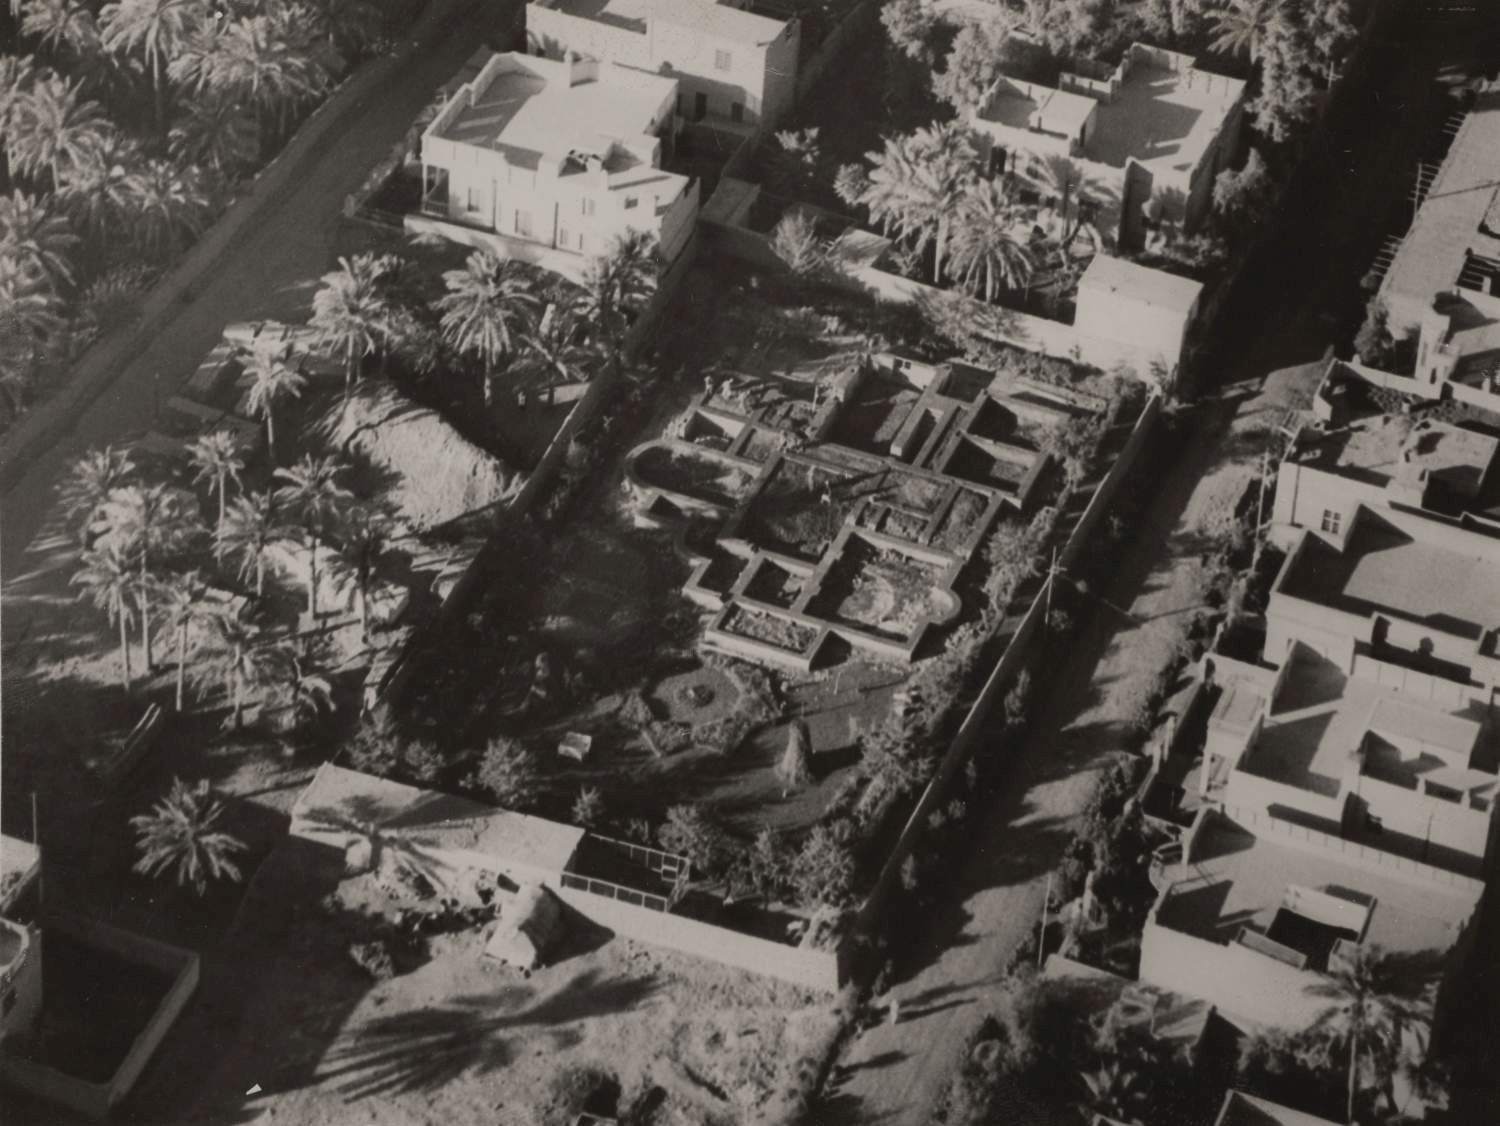 Foundation of the Kamil Chadirji House seen from above in a photo taken by the Iraqi Airforce.